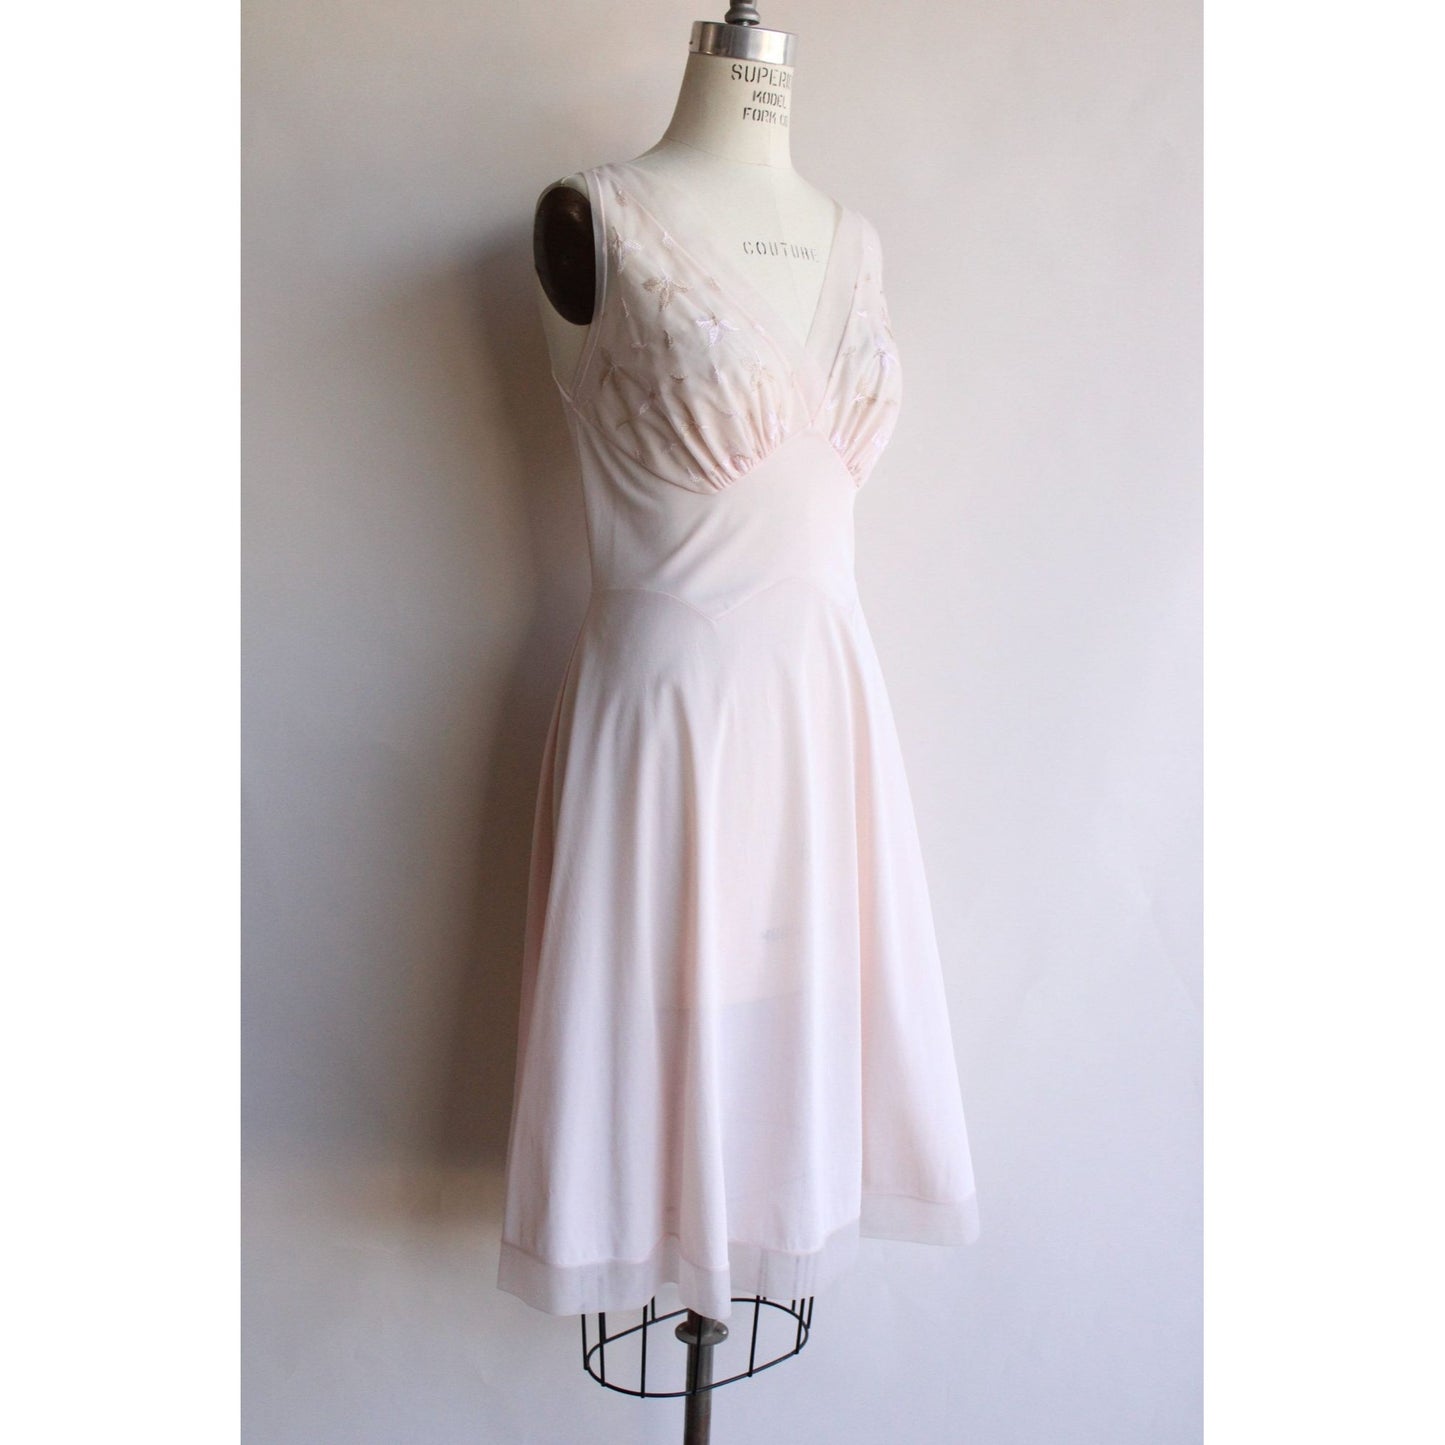 Vintage 1950s Vanity Fair Pink Nylon Embroidered Nightgown